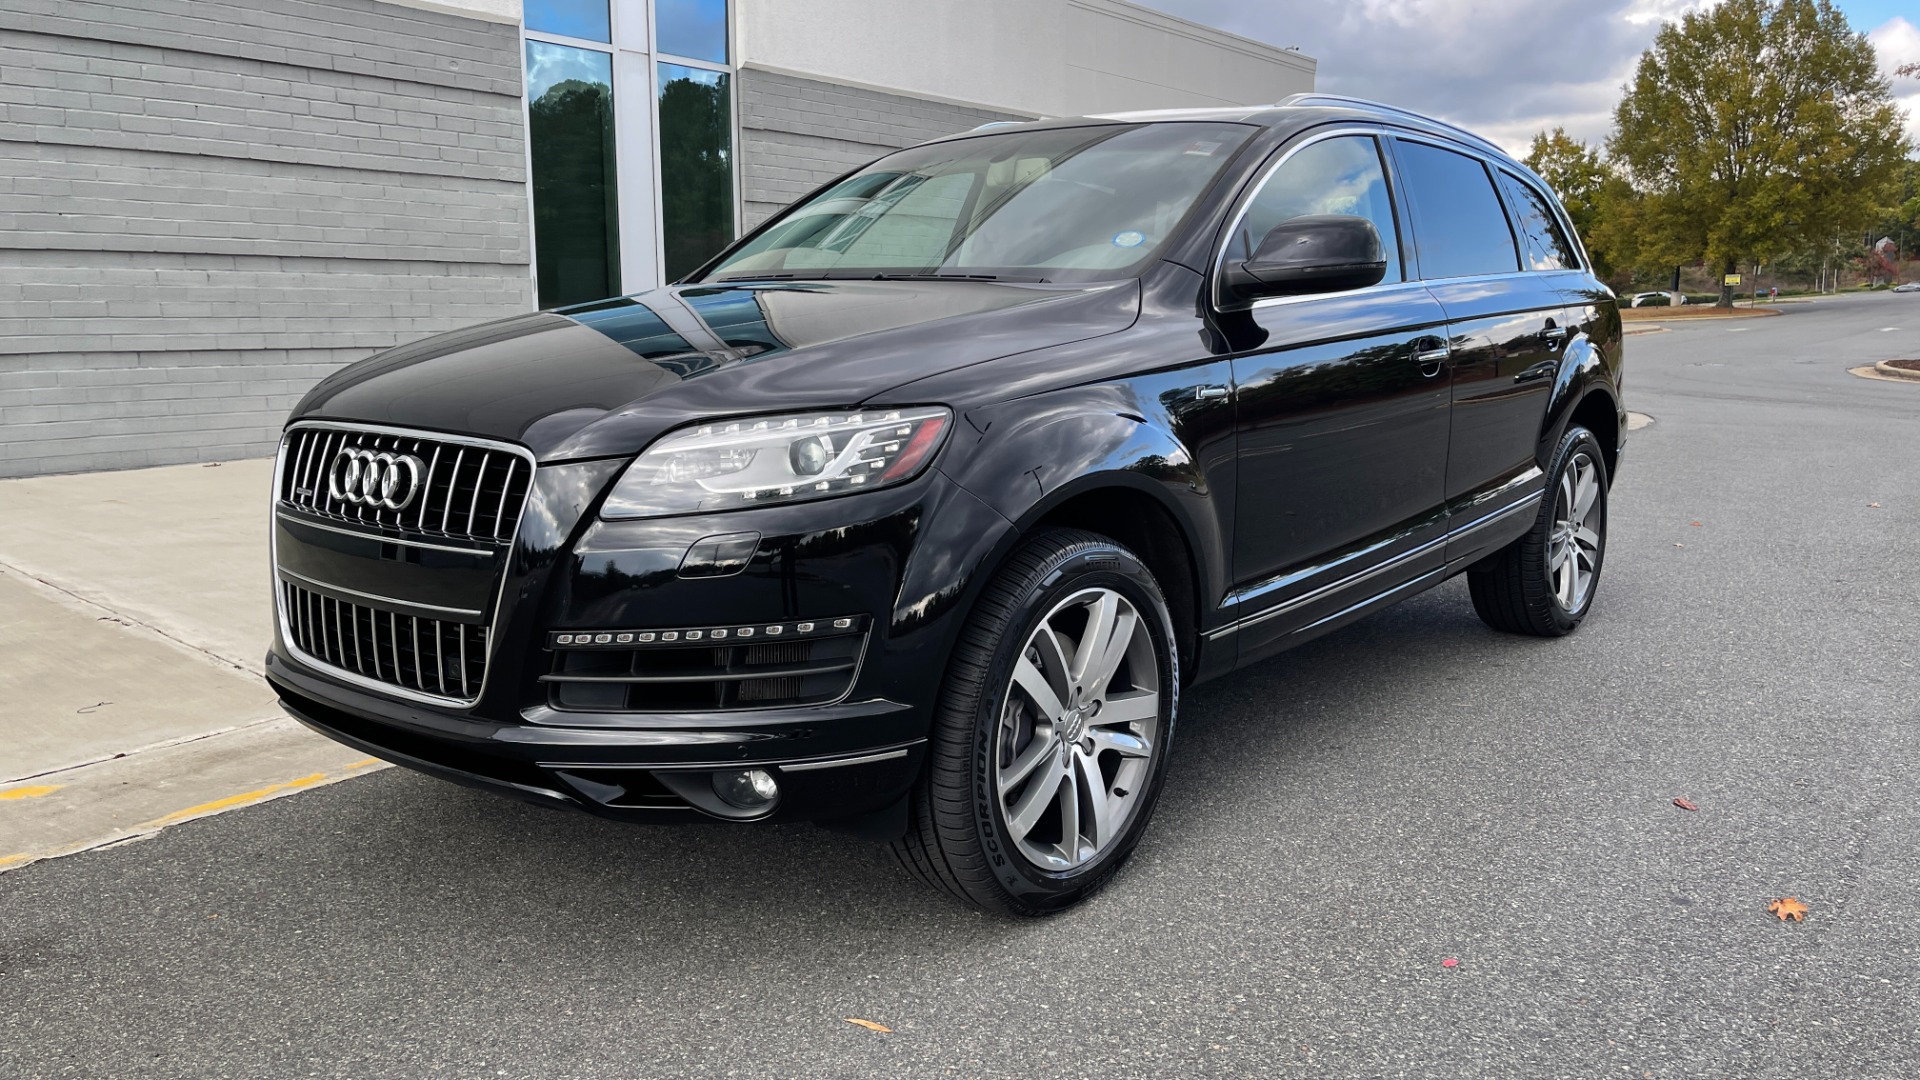 Used 2015 Audi Q7 3.0T PREMIUM PLUS / NAV / PANO-ROOF / BOSE / 3-ROW / REARVIEW for sale Sold at Formula Imports in Charlotte NC 28227 2